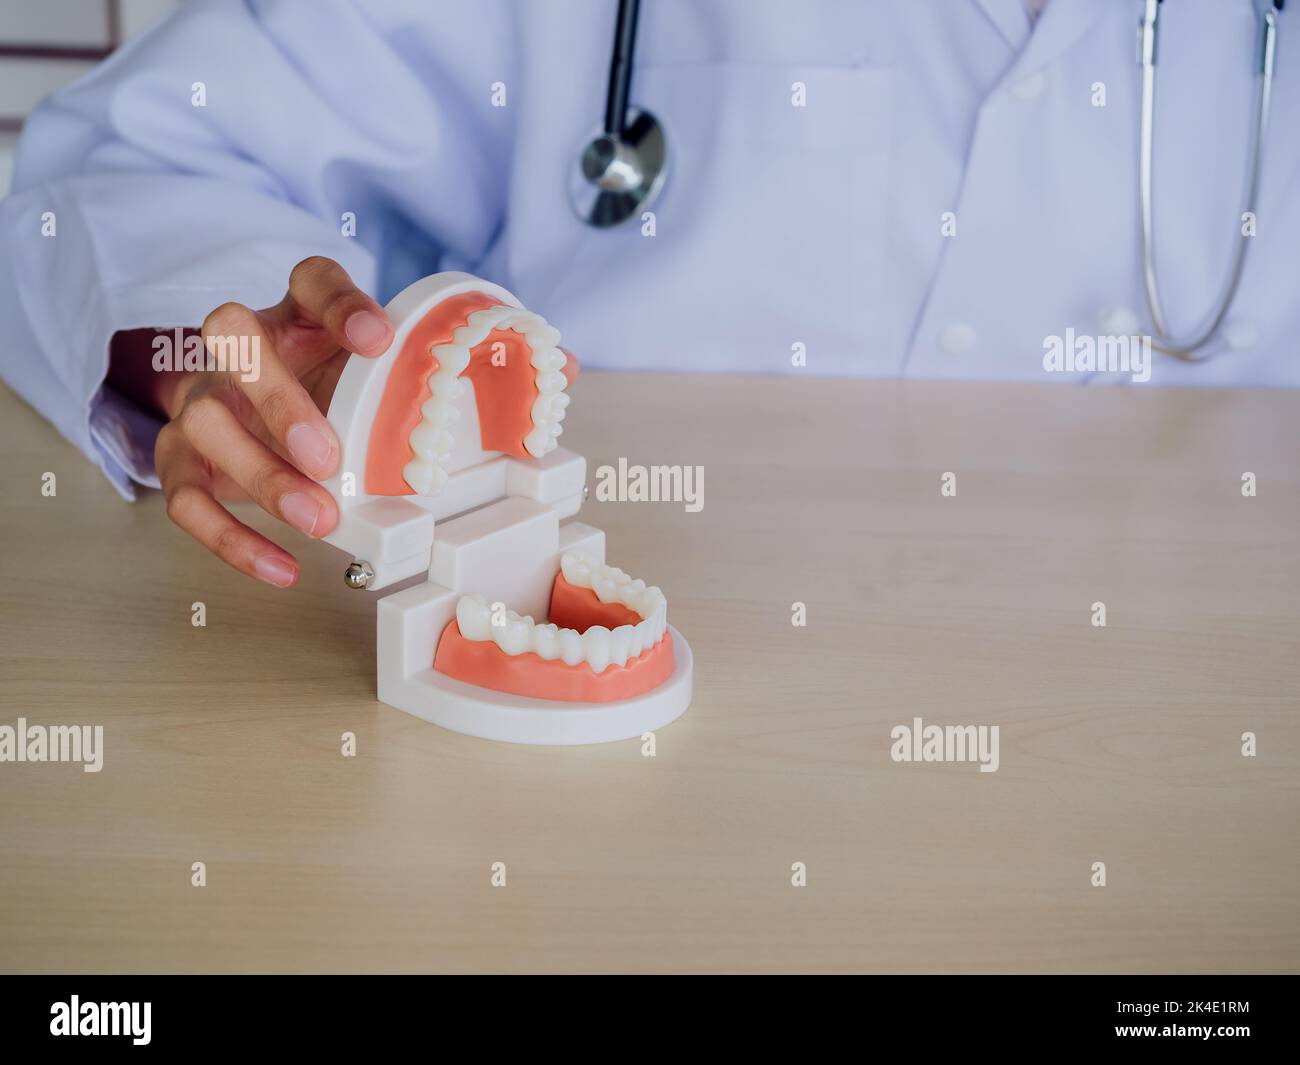 Close-up dental tooth model, open jaw and holding by female dentist's hand on wood desk in office with copy space. Dental care and healthy teeth. Stock Photo